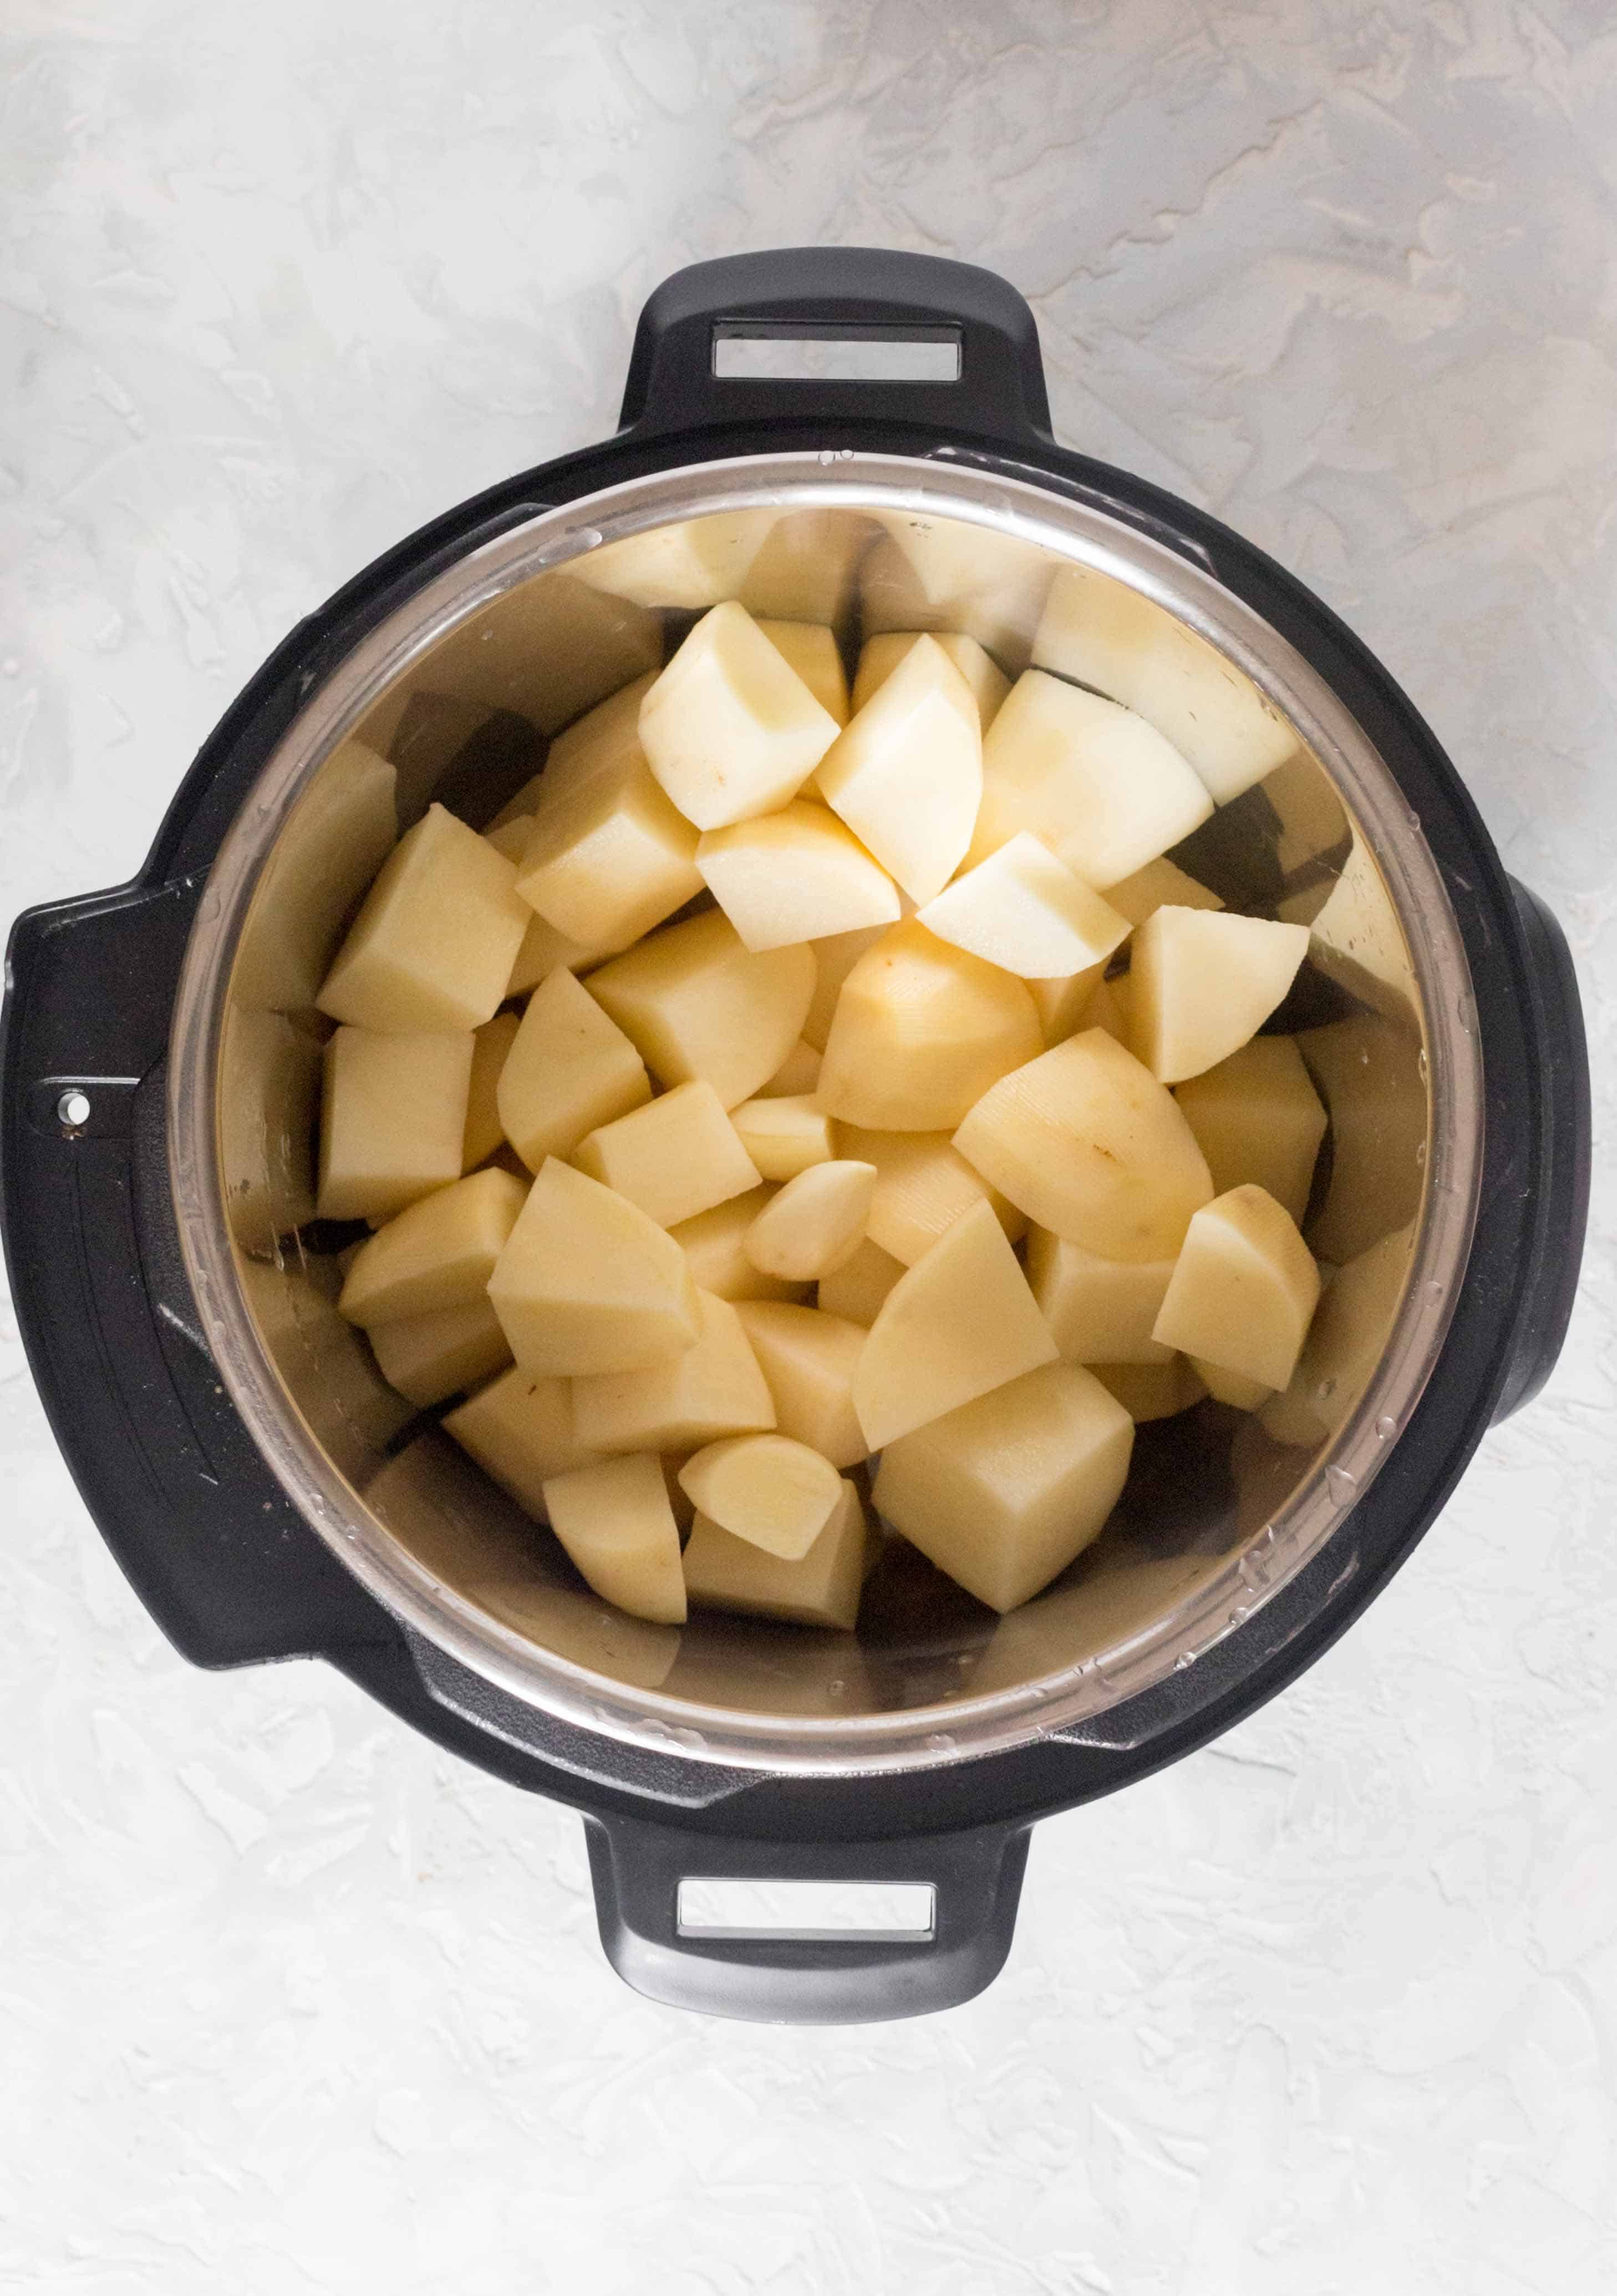 Diced potatoes in the pressure cooker.